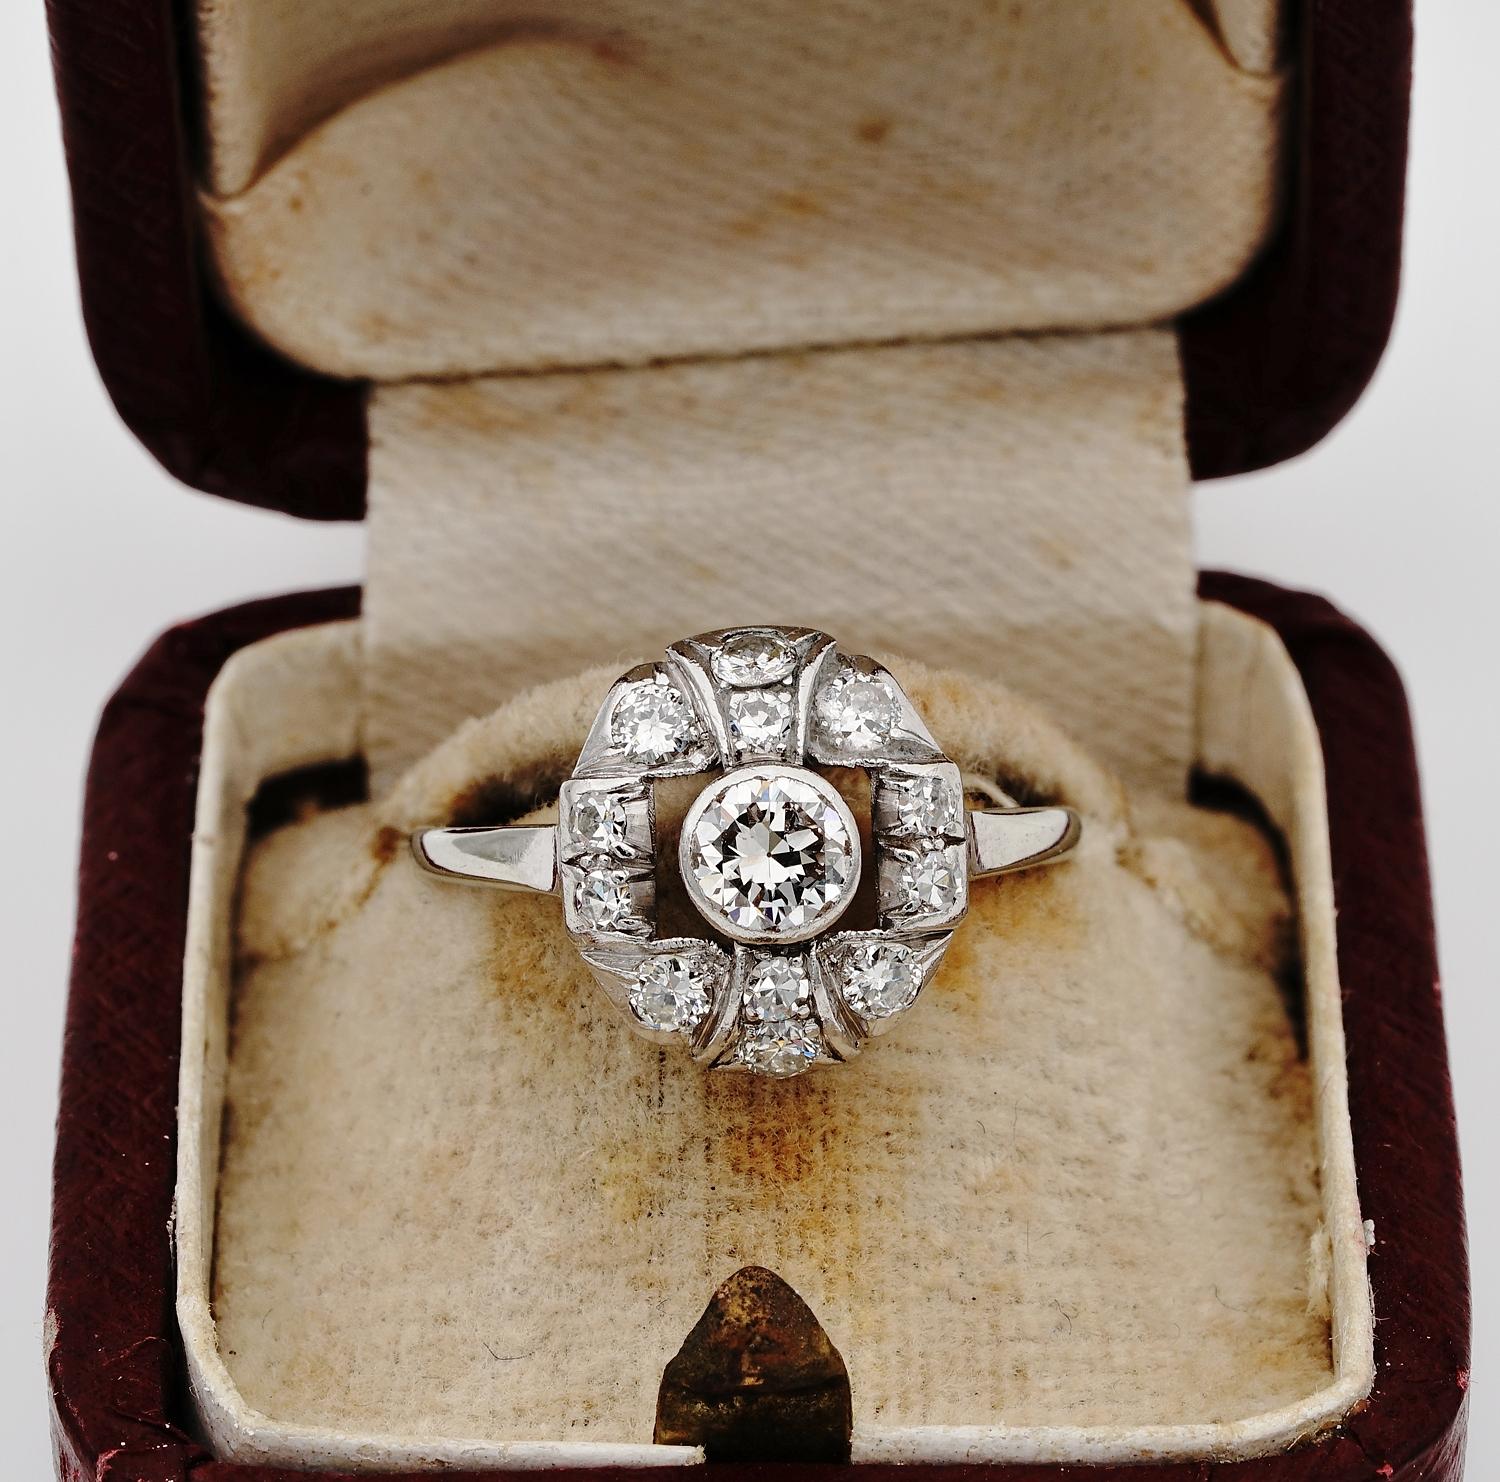 Edwardian rare example made of Platinum, 1910 ca
Charming design expressing the eternal elegance of that short era
Skilfully hand crafted
.90 Ct of Diamonds in total, principle is .45 Ct. G/H VVS – complementary Diamonds make approx .45 Ct.